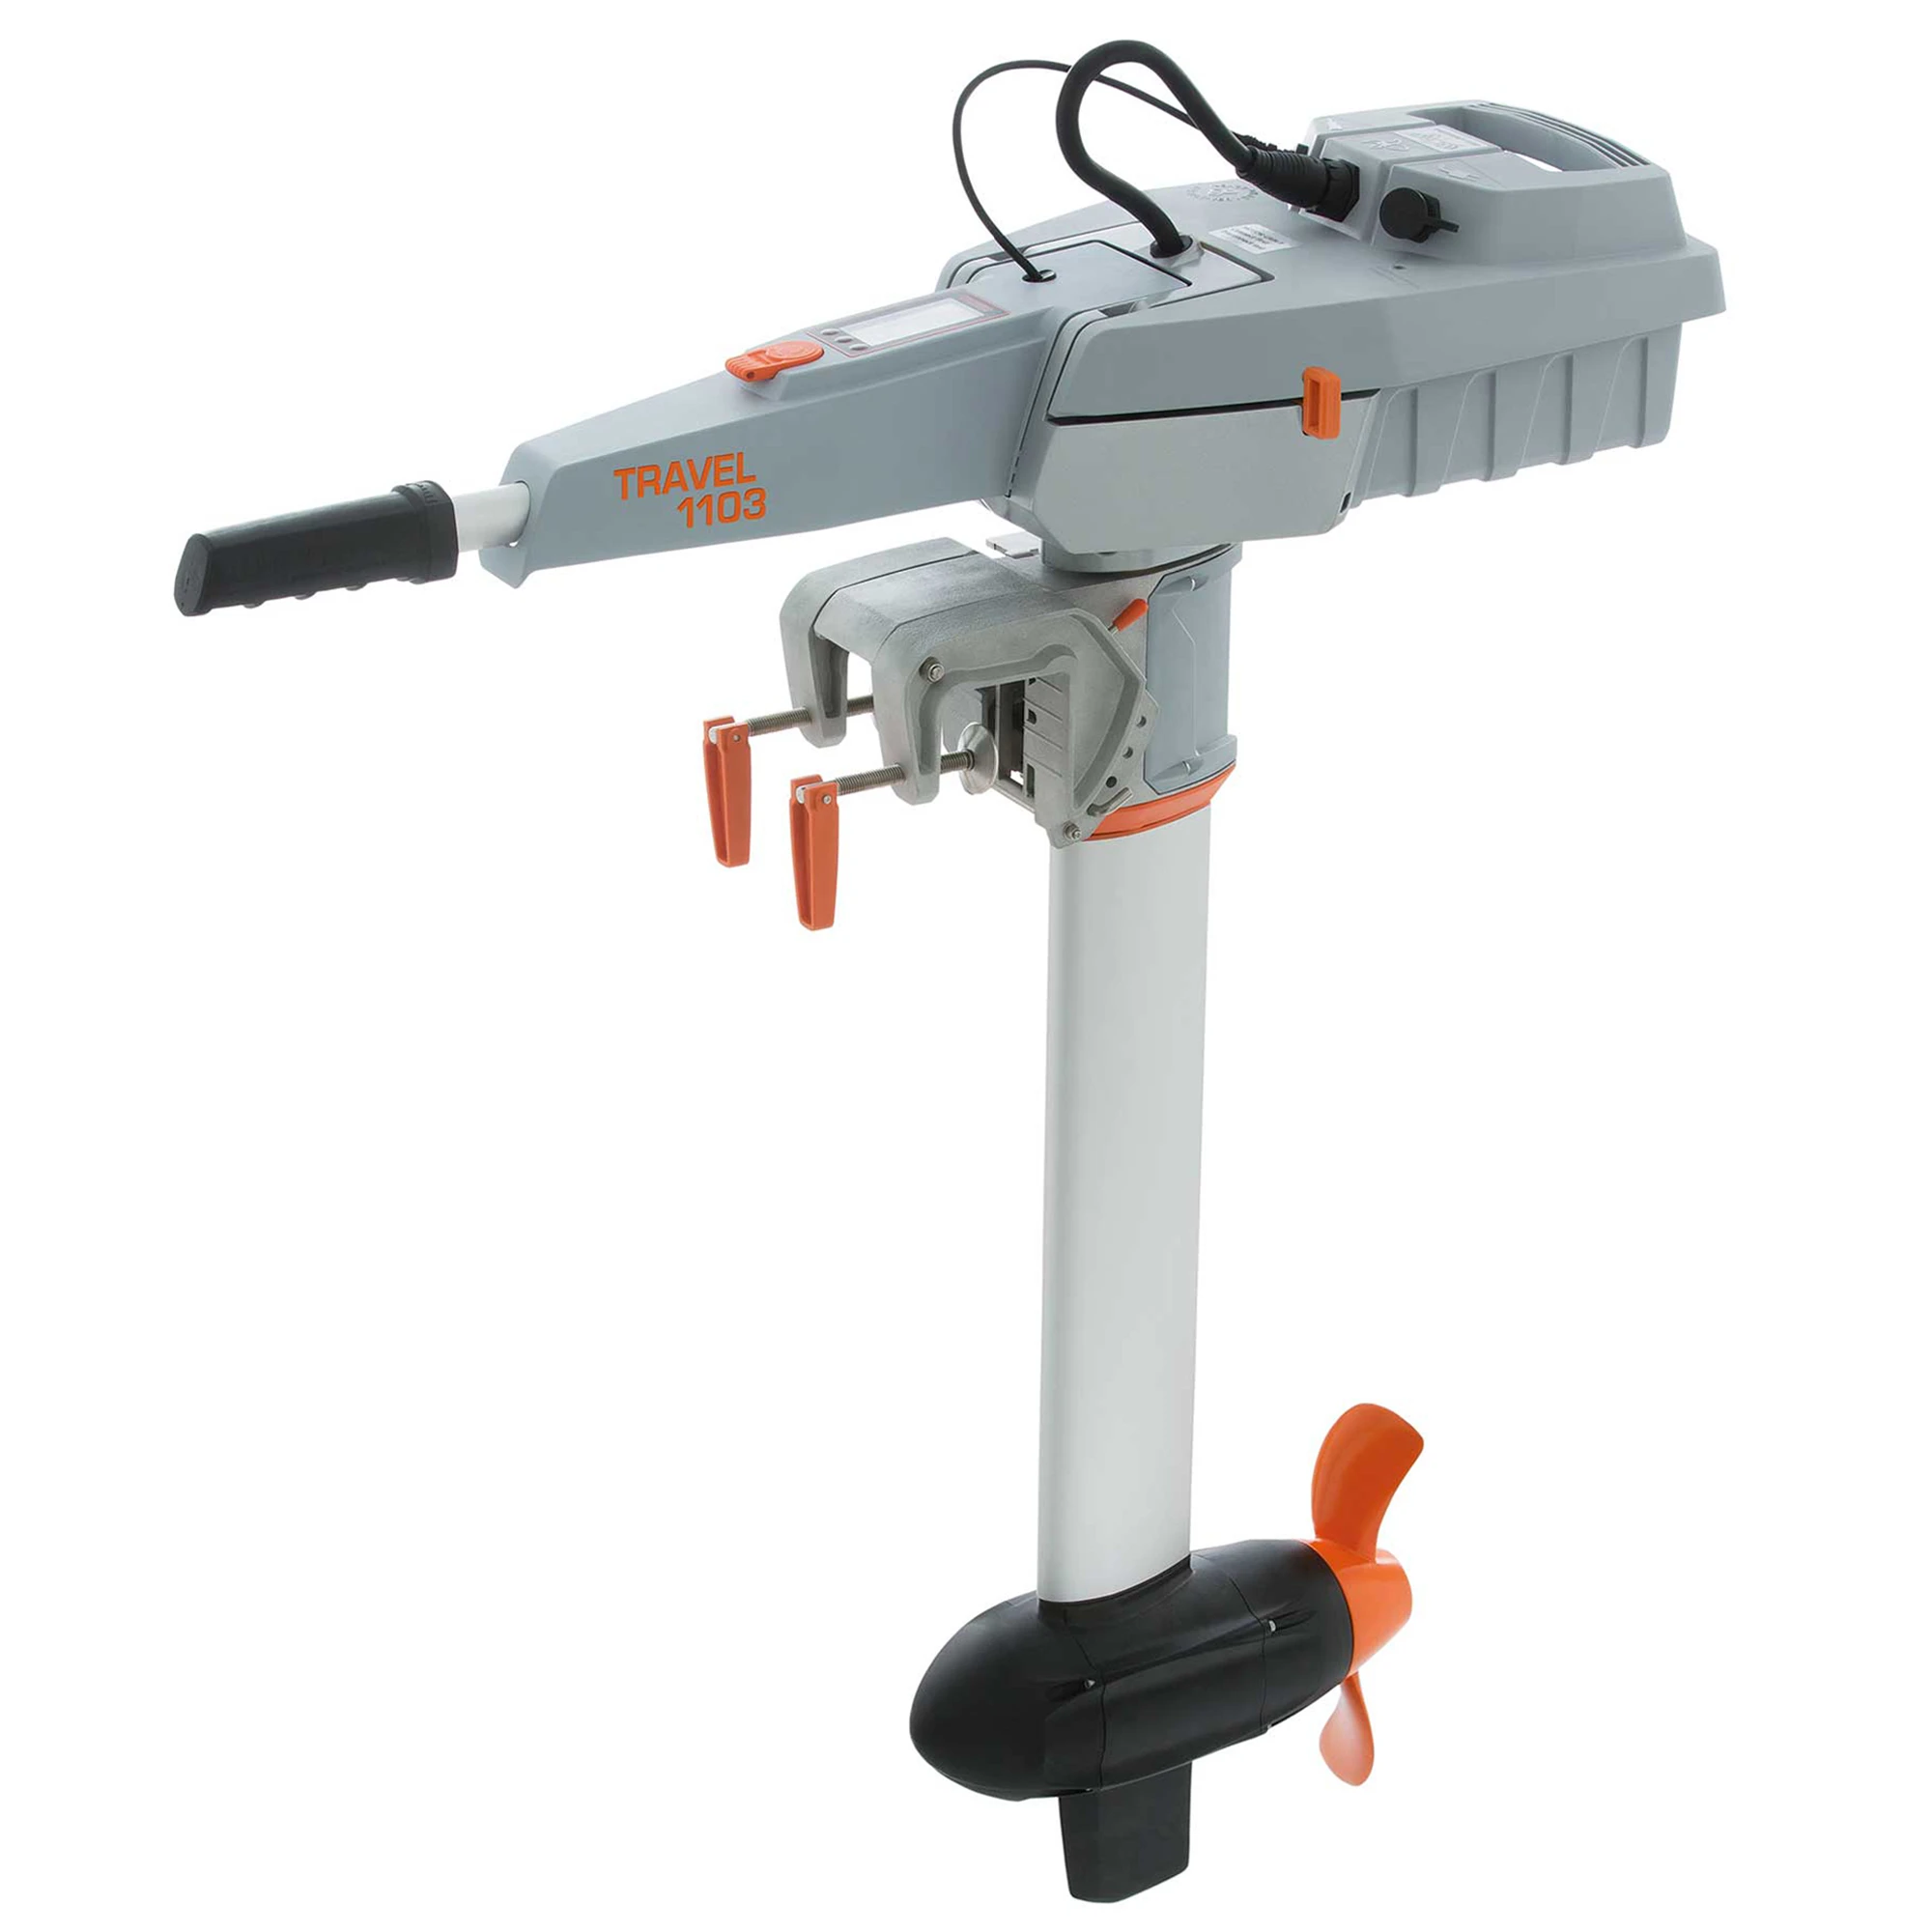 

HOT SALES FOR Torqeedo TRAVEL 1103 C Electric Outboard Motor